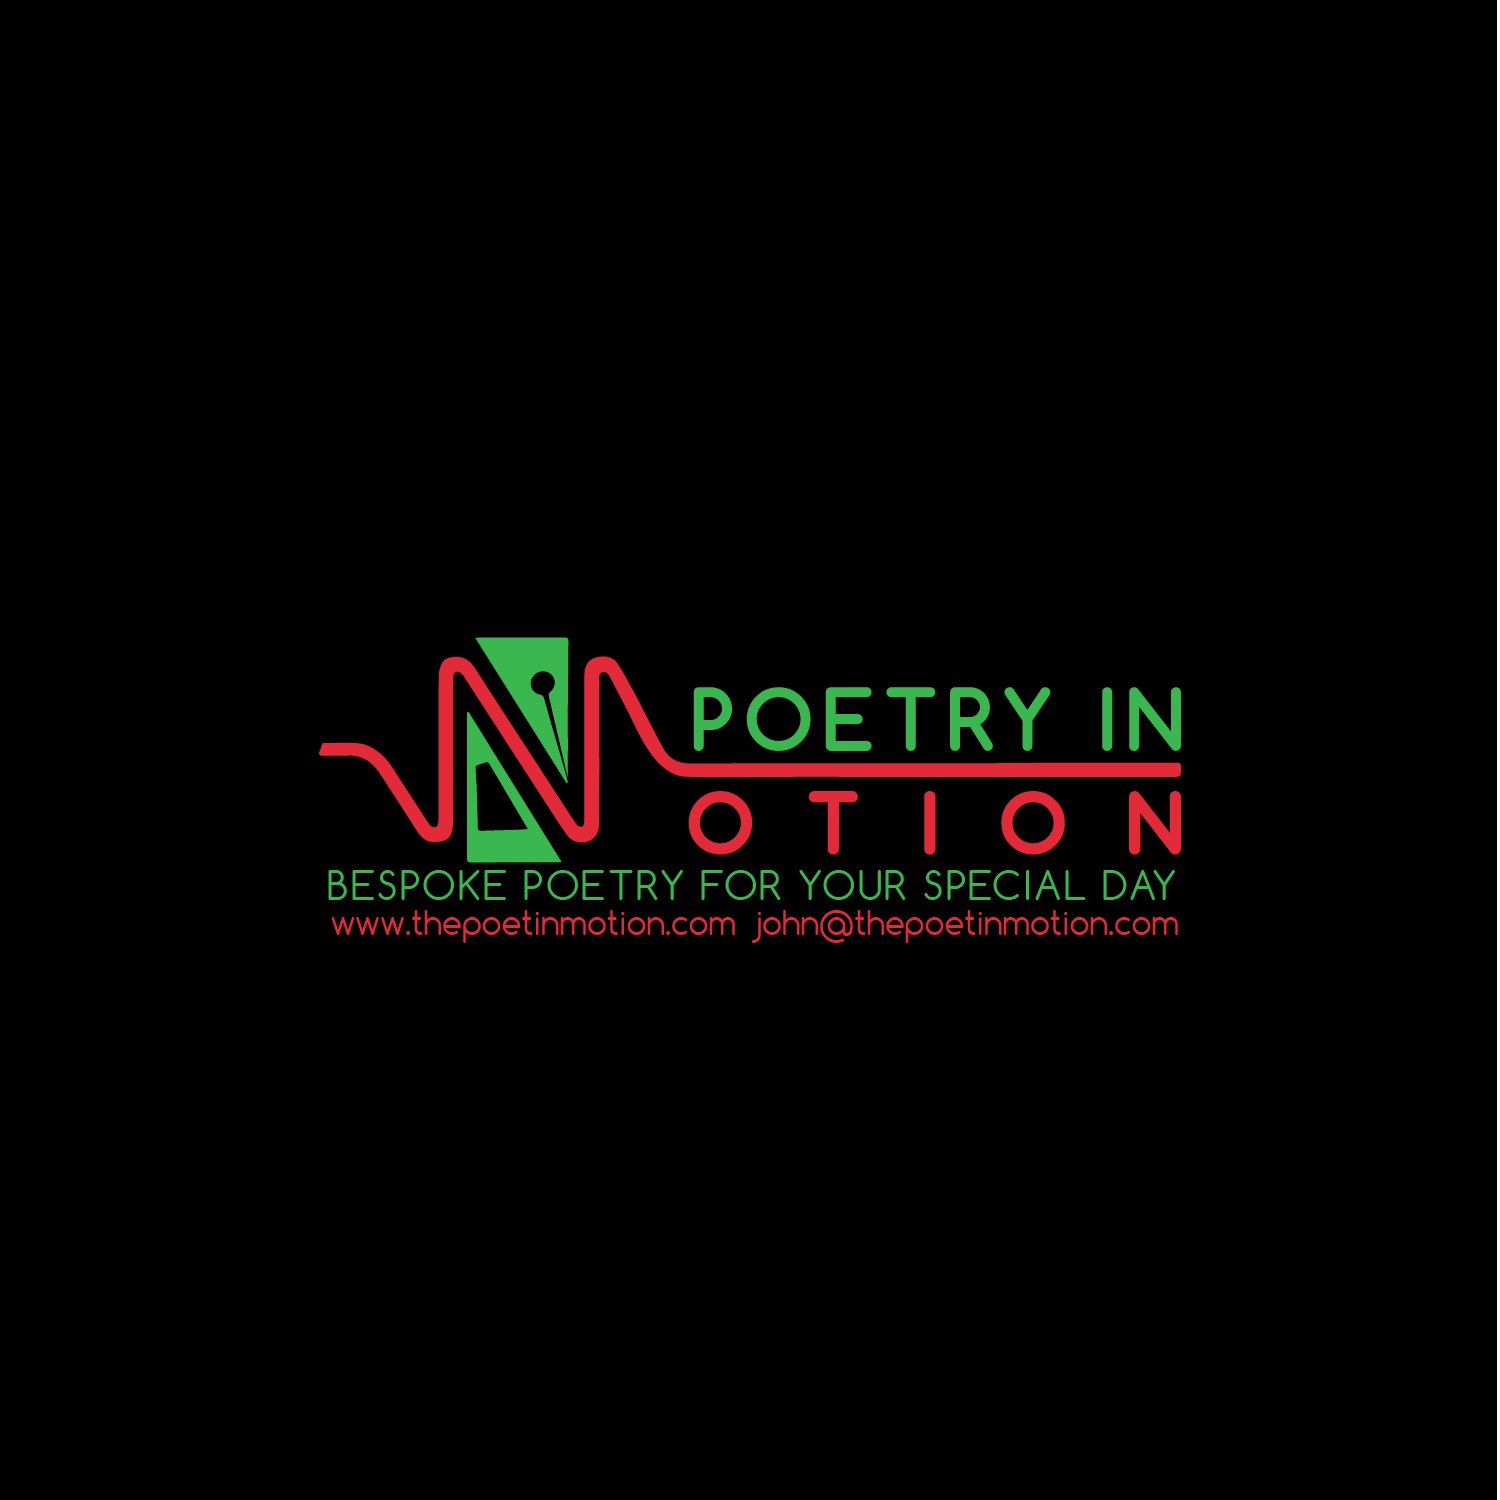 https://t.co/hfqIAmOeZu creates bespoke poetry for special occasions. Have no nerves and have no fear, John the poet man is here. email: johnwalshpoetry@outlook.com